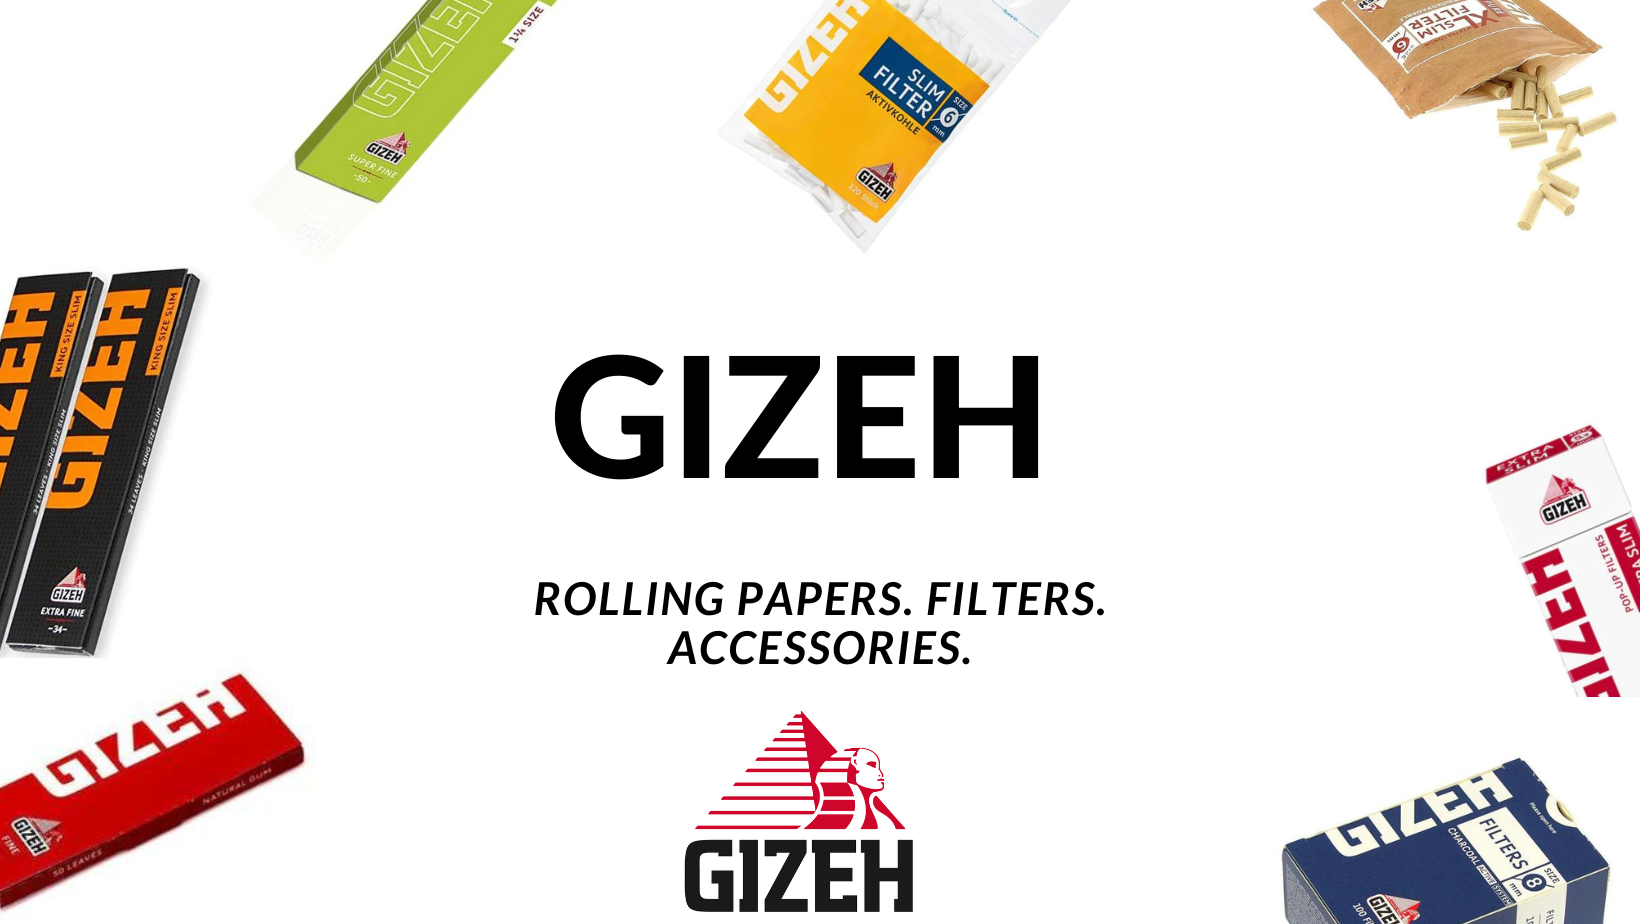 Gizeh – Filter